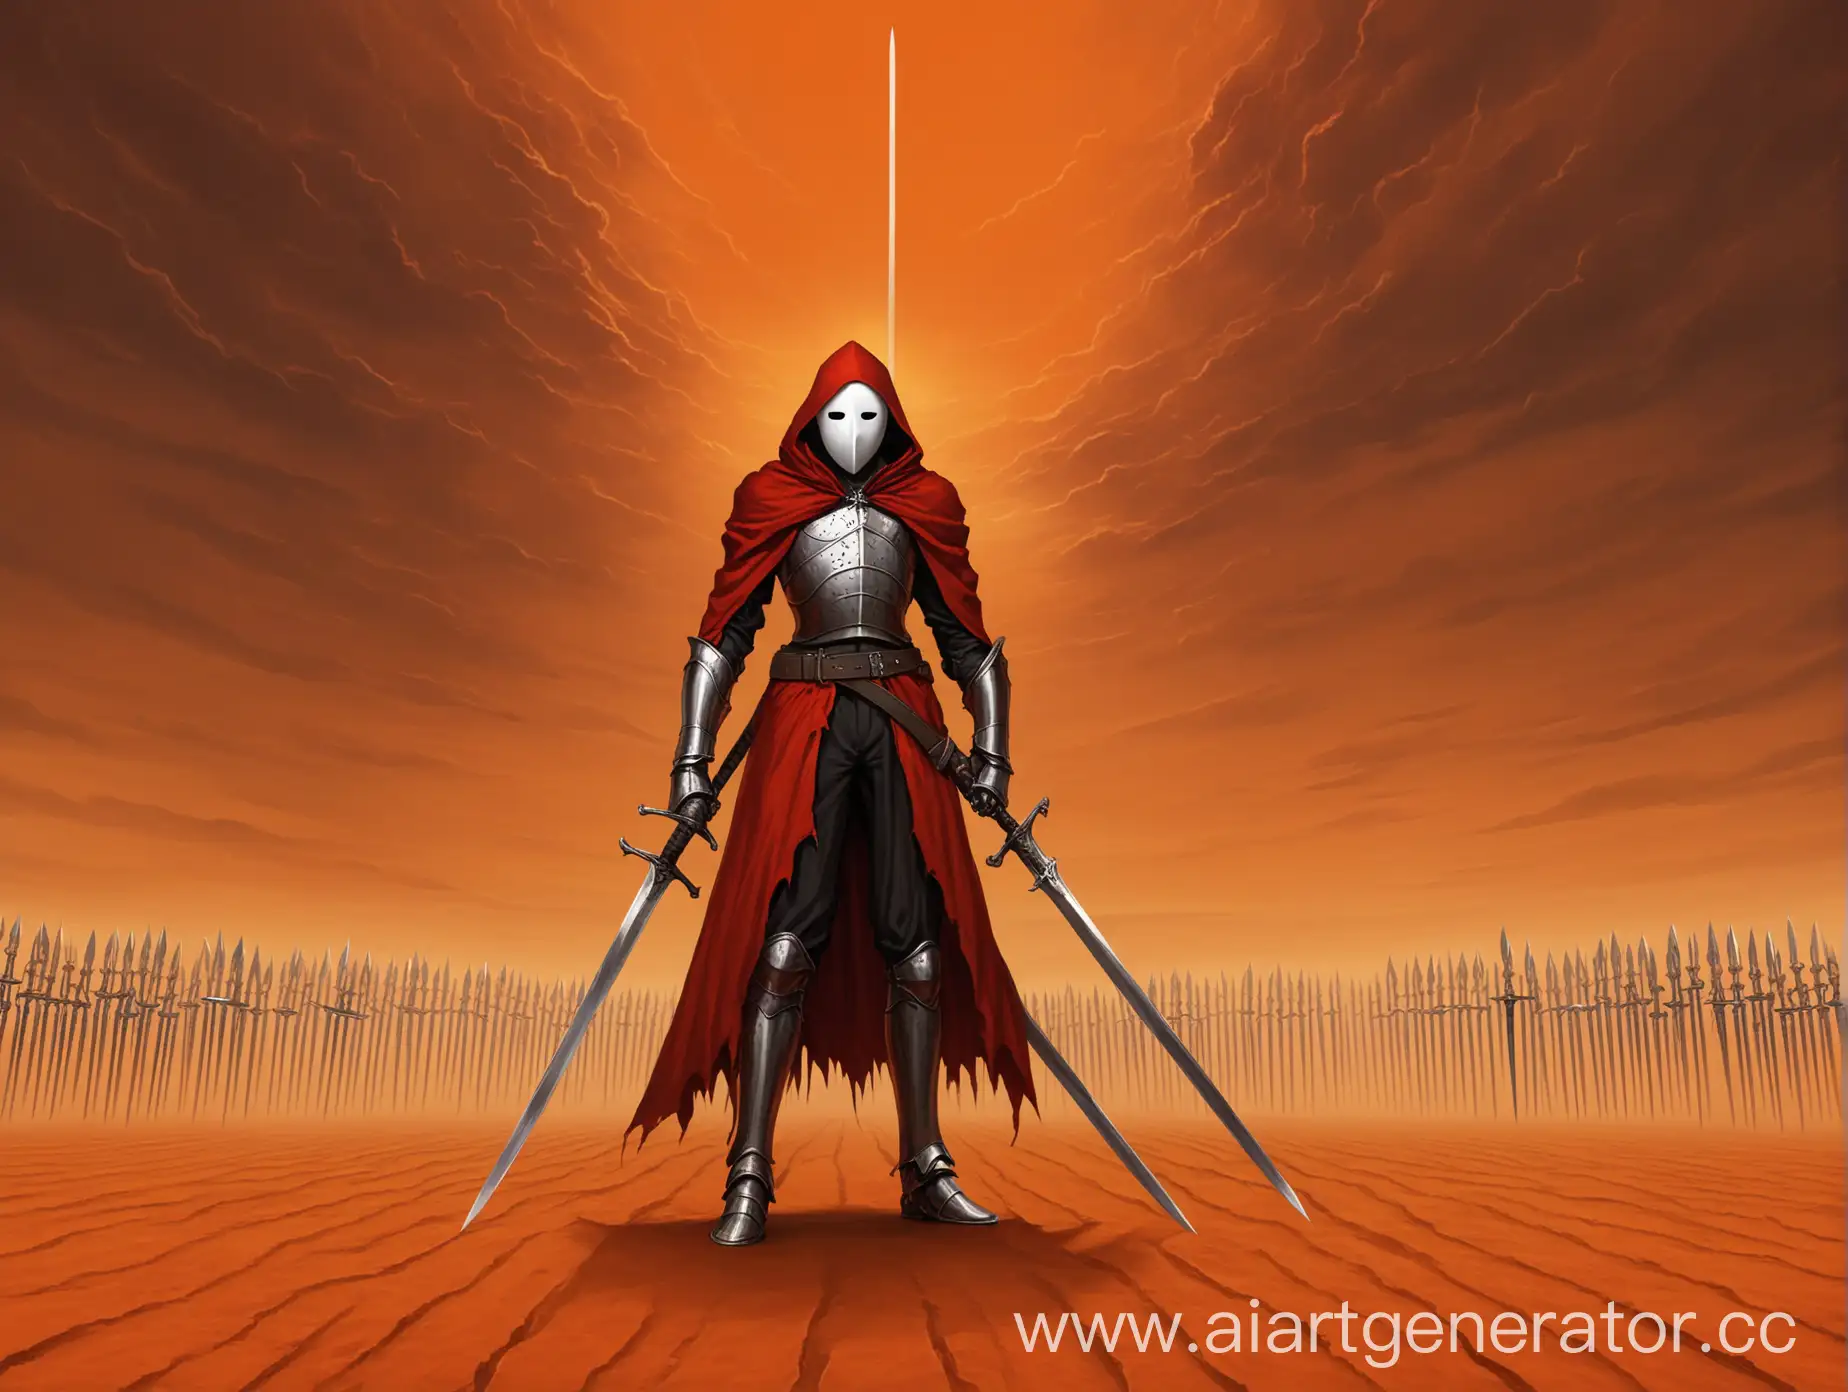 Man, thin man, warrior, with spear, with two daggers, full height, armor, red short torn cloak, red hood, black trousers, boots, gauntlets, white faceless mask with black eye slots, pistol on his belt, small cross on the chest, standing in a orange desert field of swords, swords around, dark orange cloudy sky